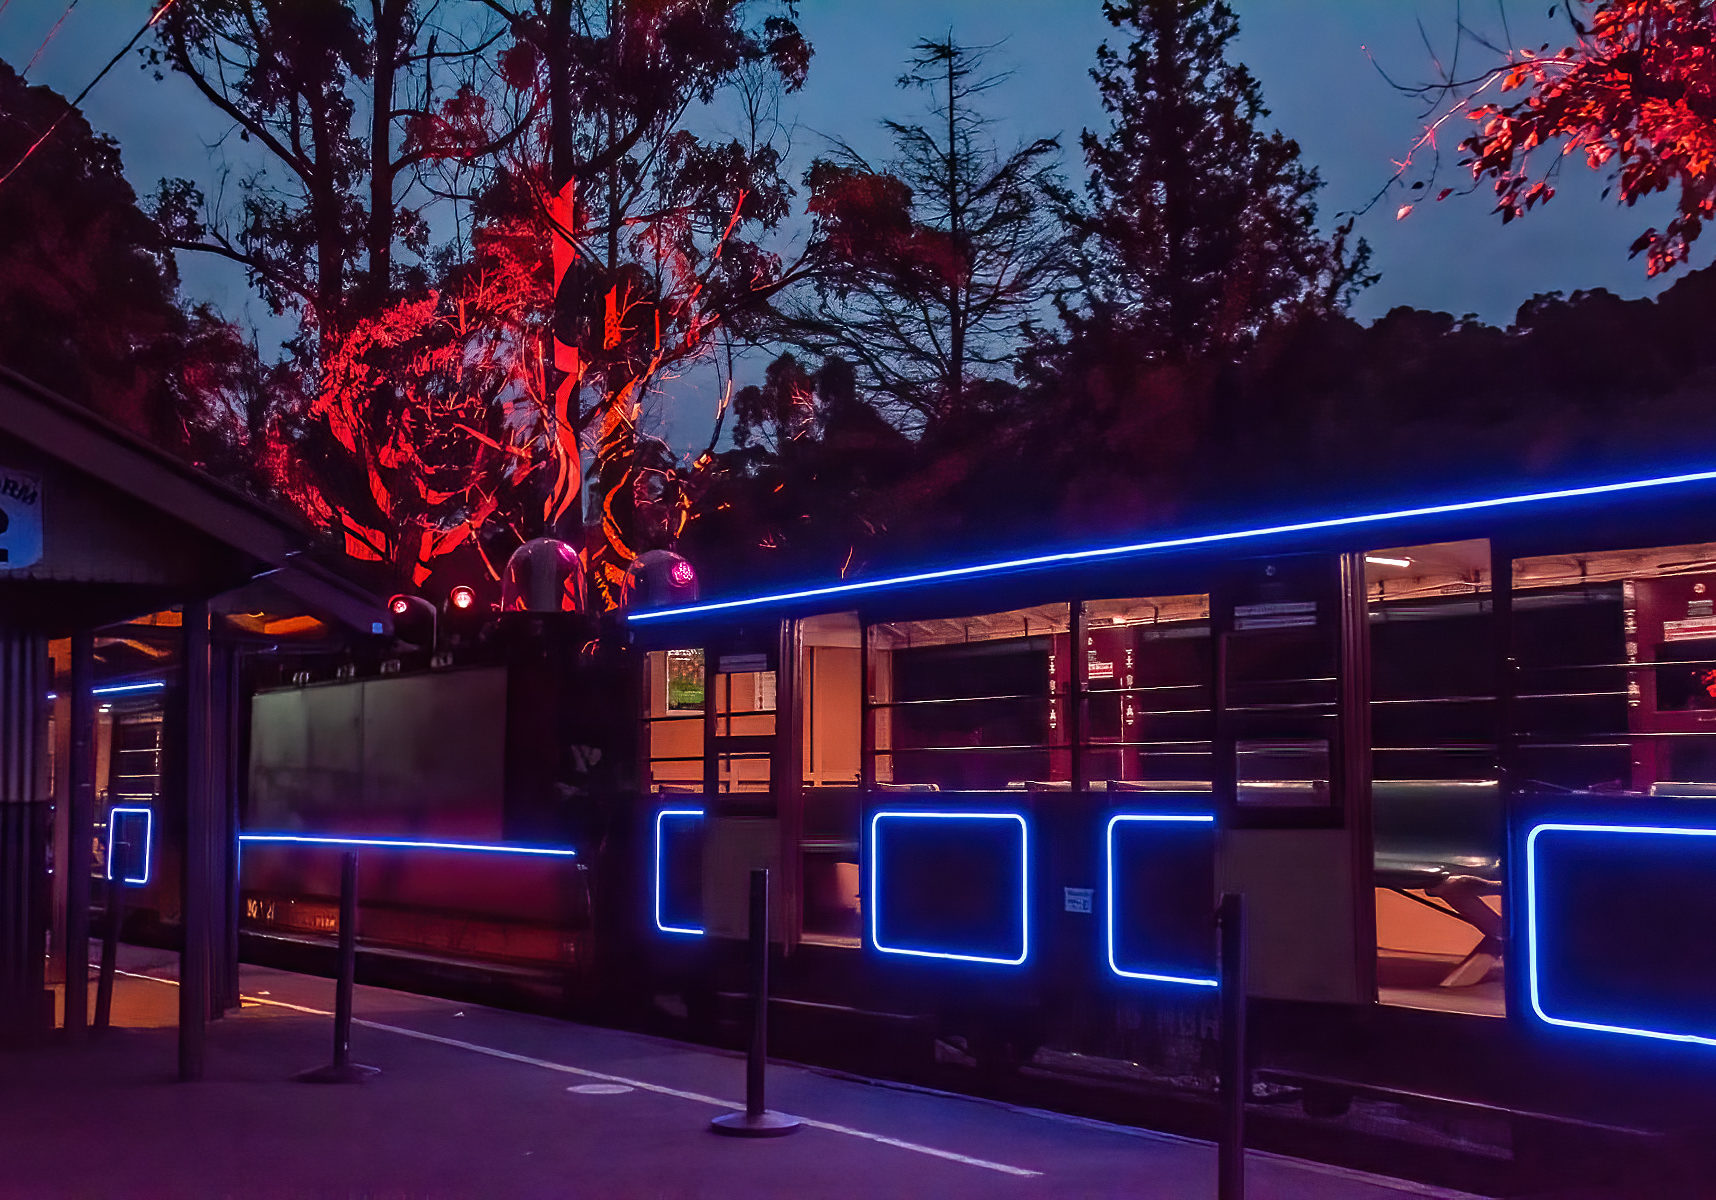 Open side carriage on a platform. The train is decorated with light installations. It is dark outside.